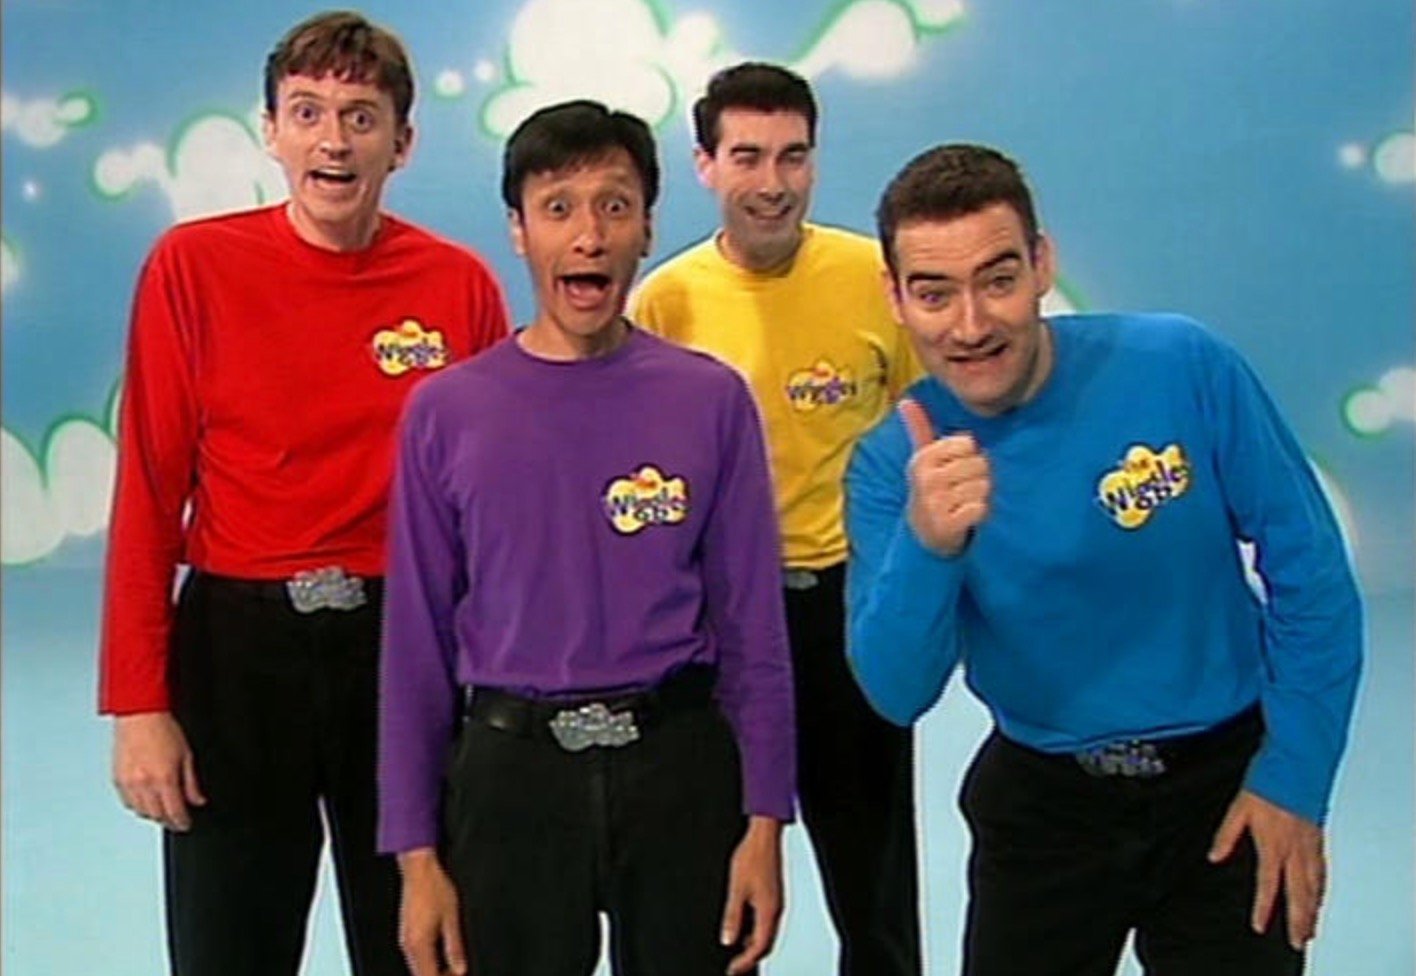 The Original Wiggles Have Announced Details For Their One Off 18